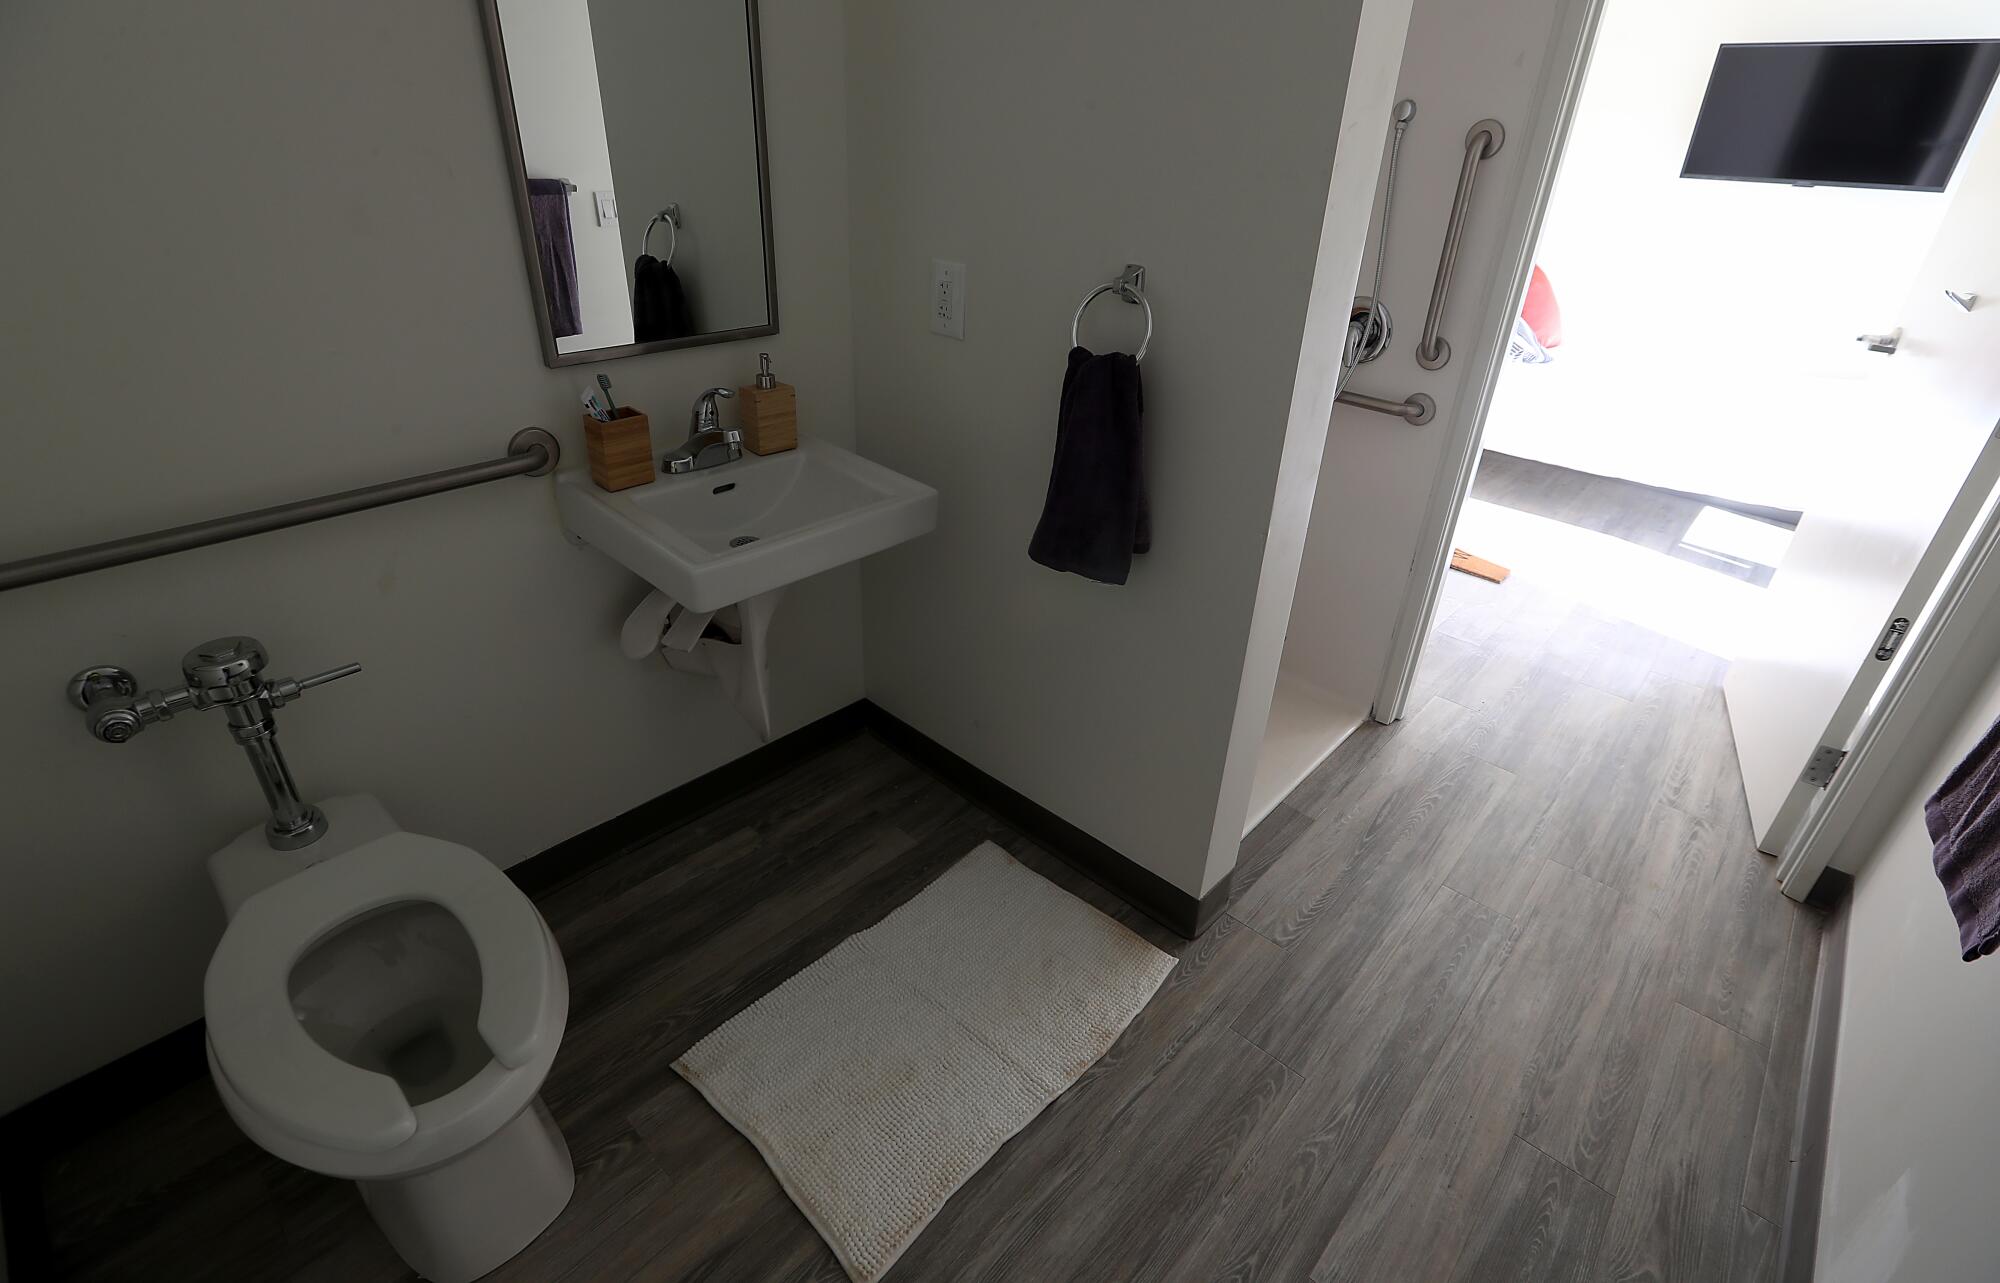 A bathroom in one of the housing units.  